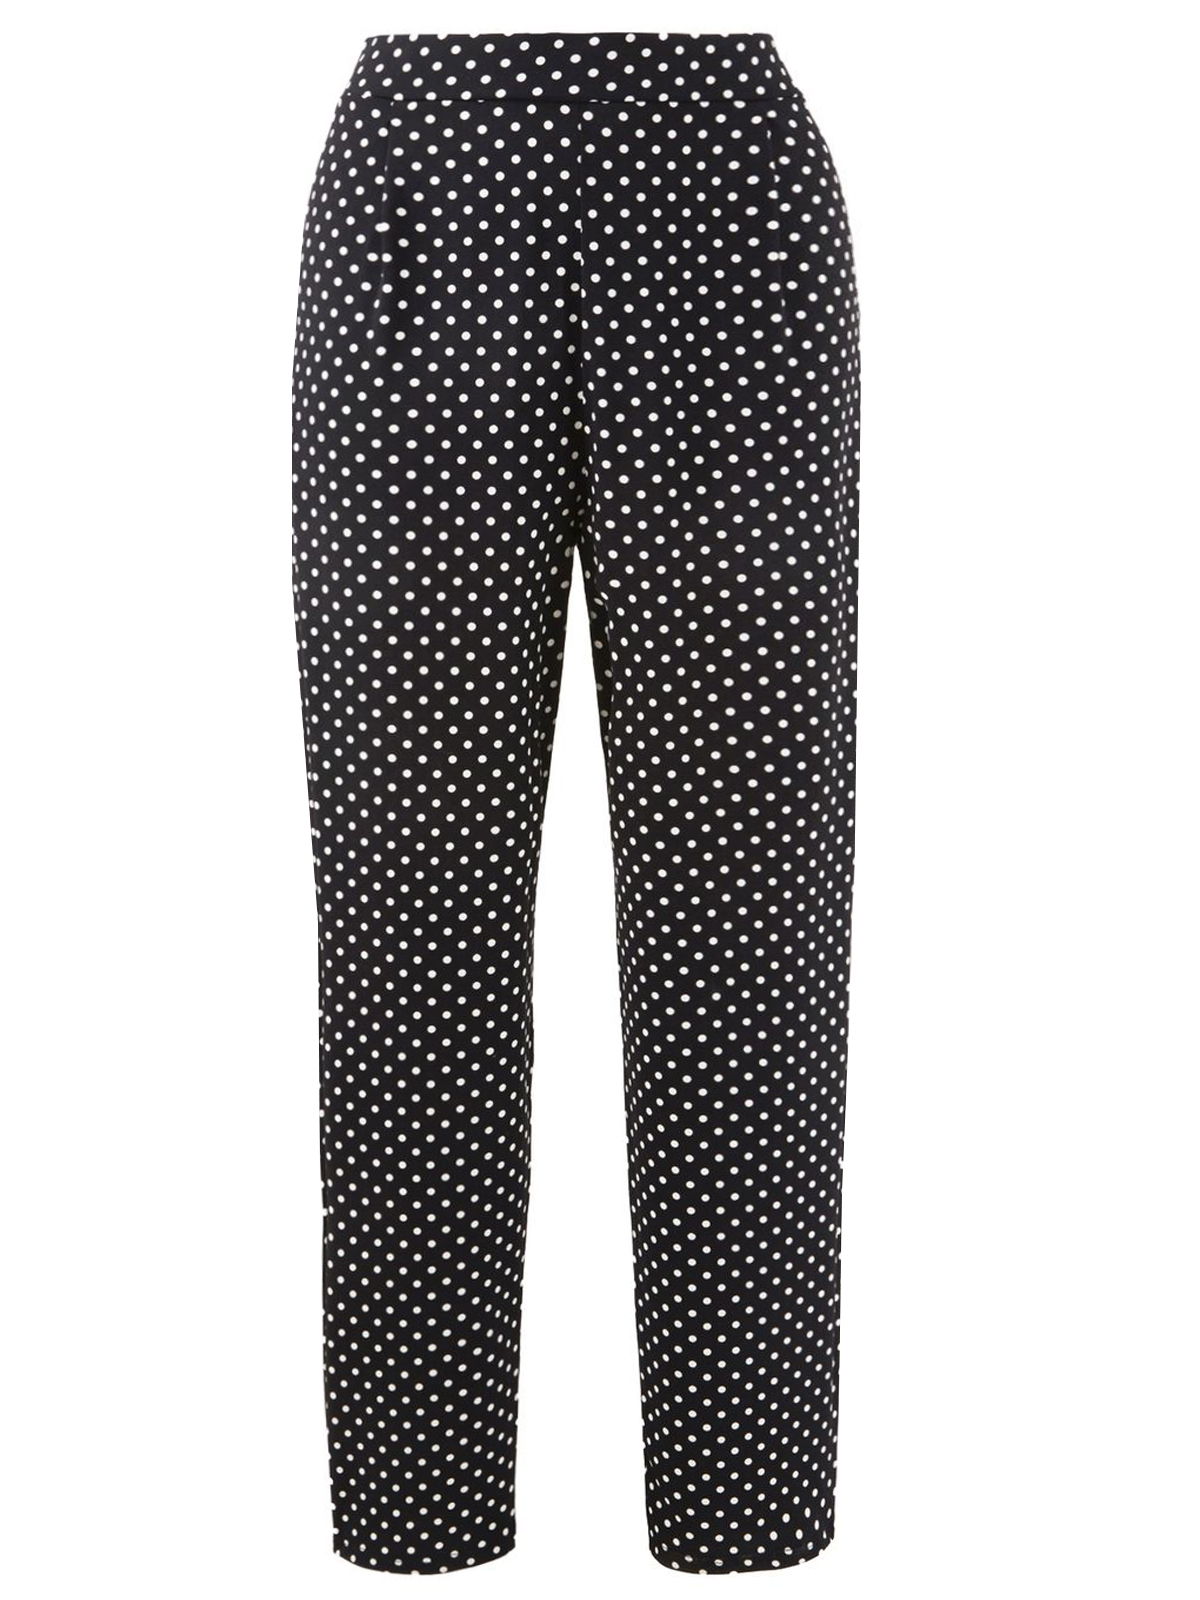 Grace (Made In Britain) - - Grace BLACK Polka Dot Tapered Trousers - Size 8